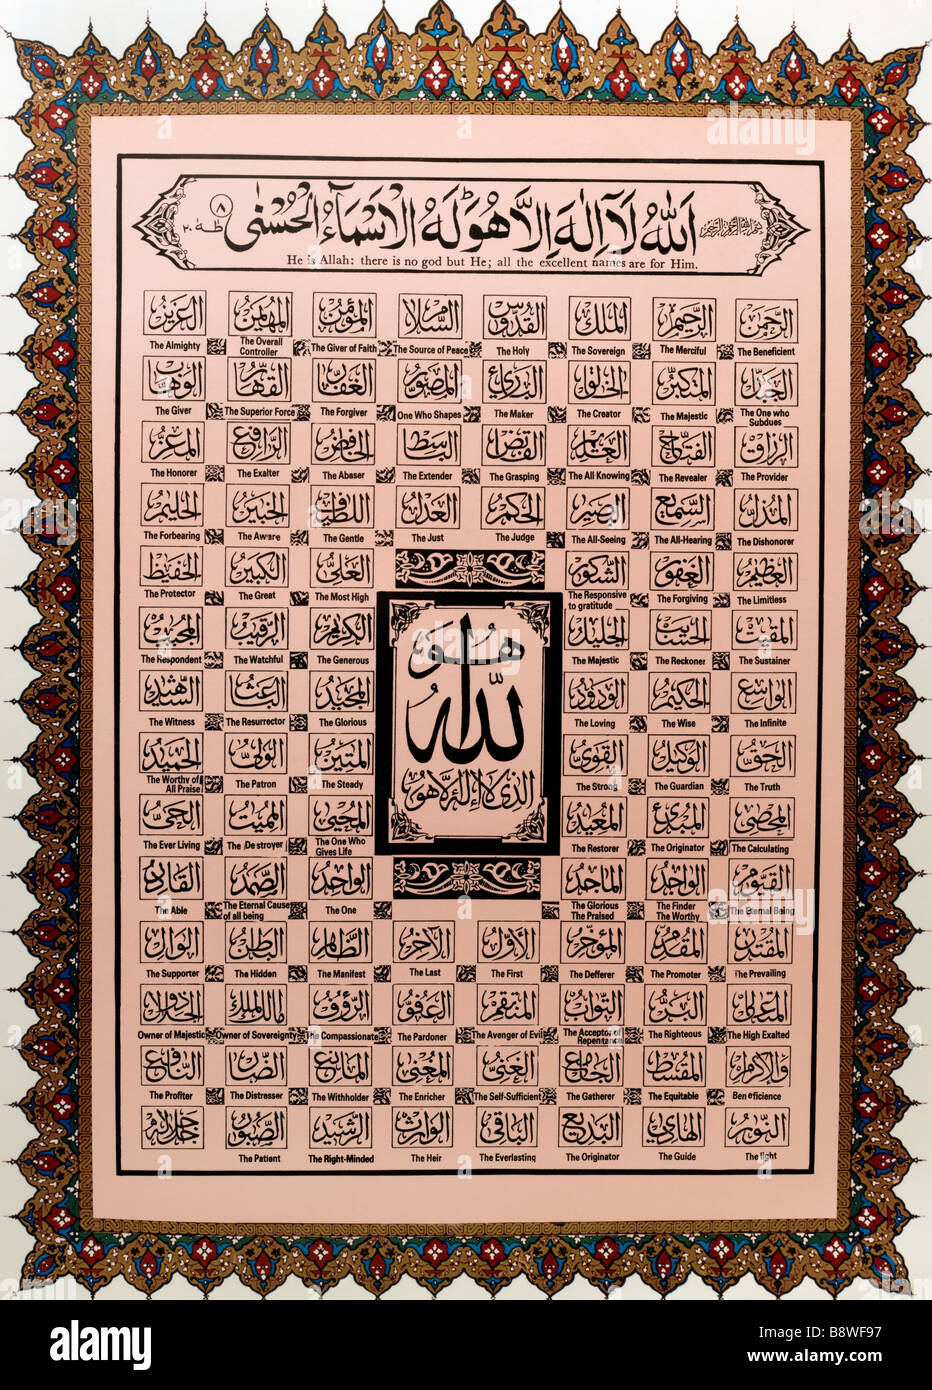 99 Names Of Allah Project